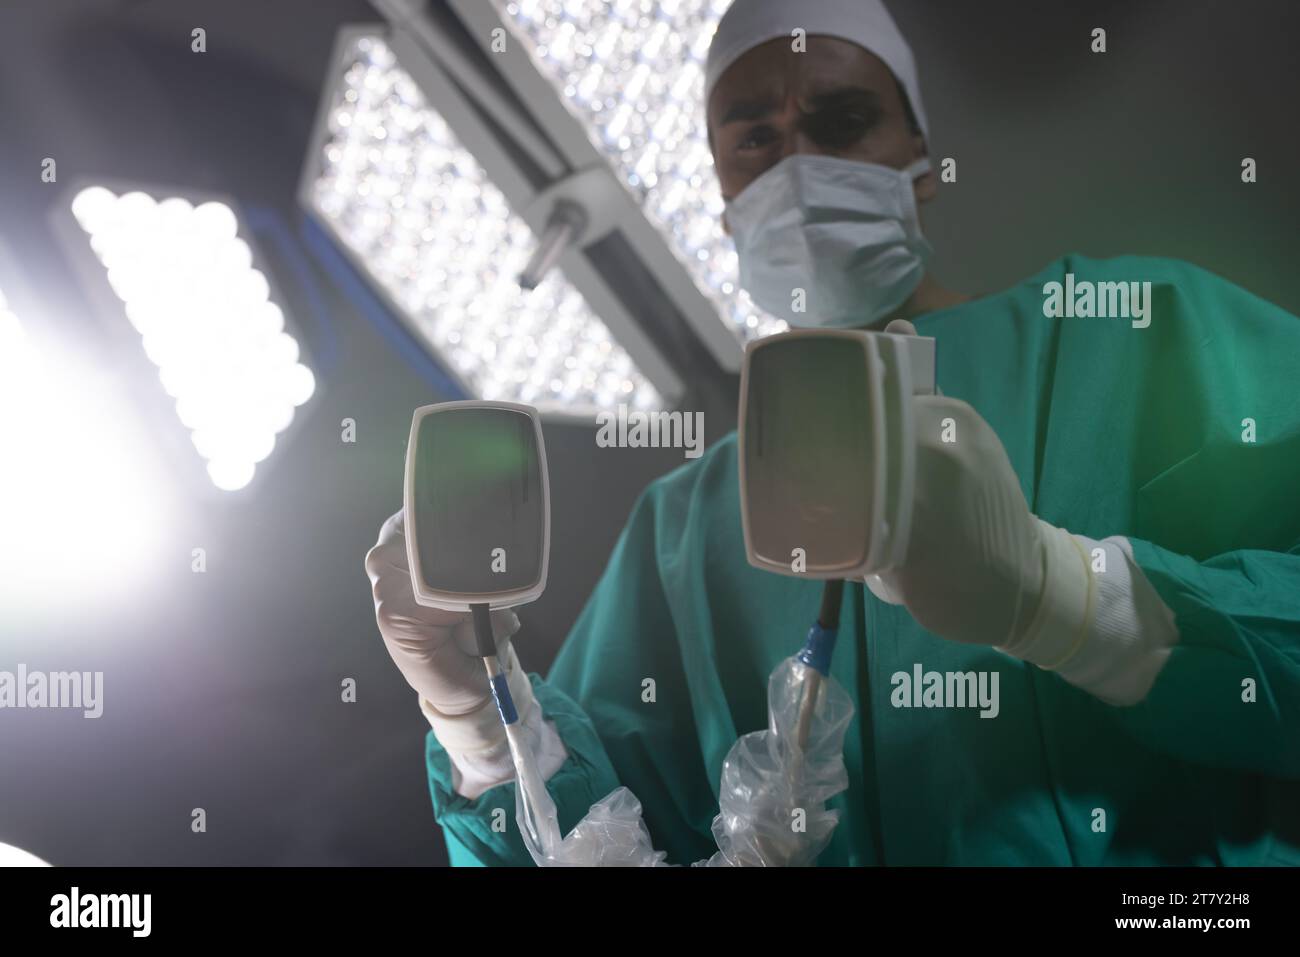 Biracial male surgeon wearing surgical gown using defibrillator in operating theatre at hospital Stock Photo